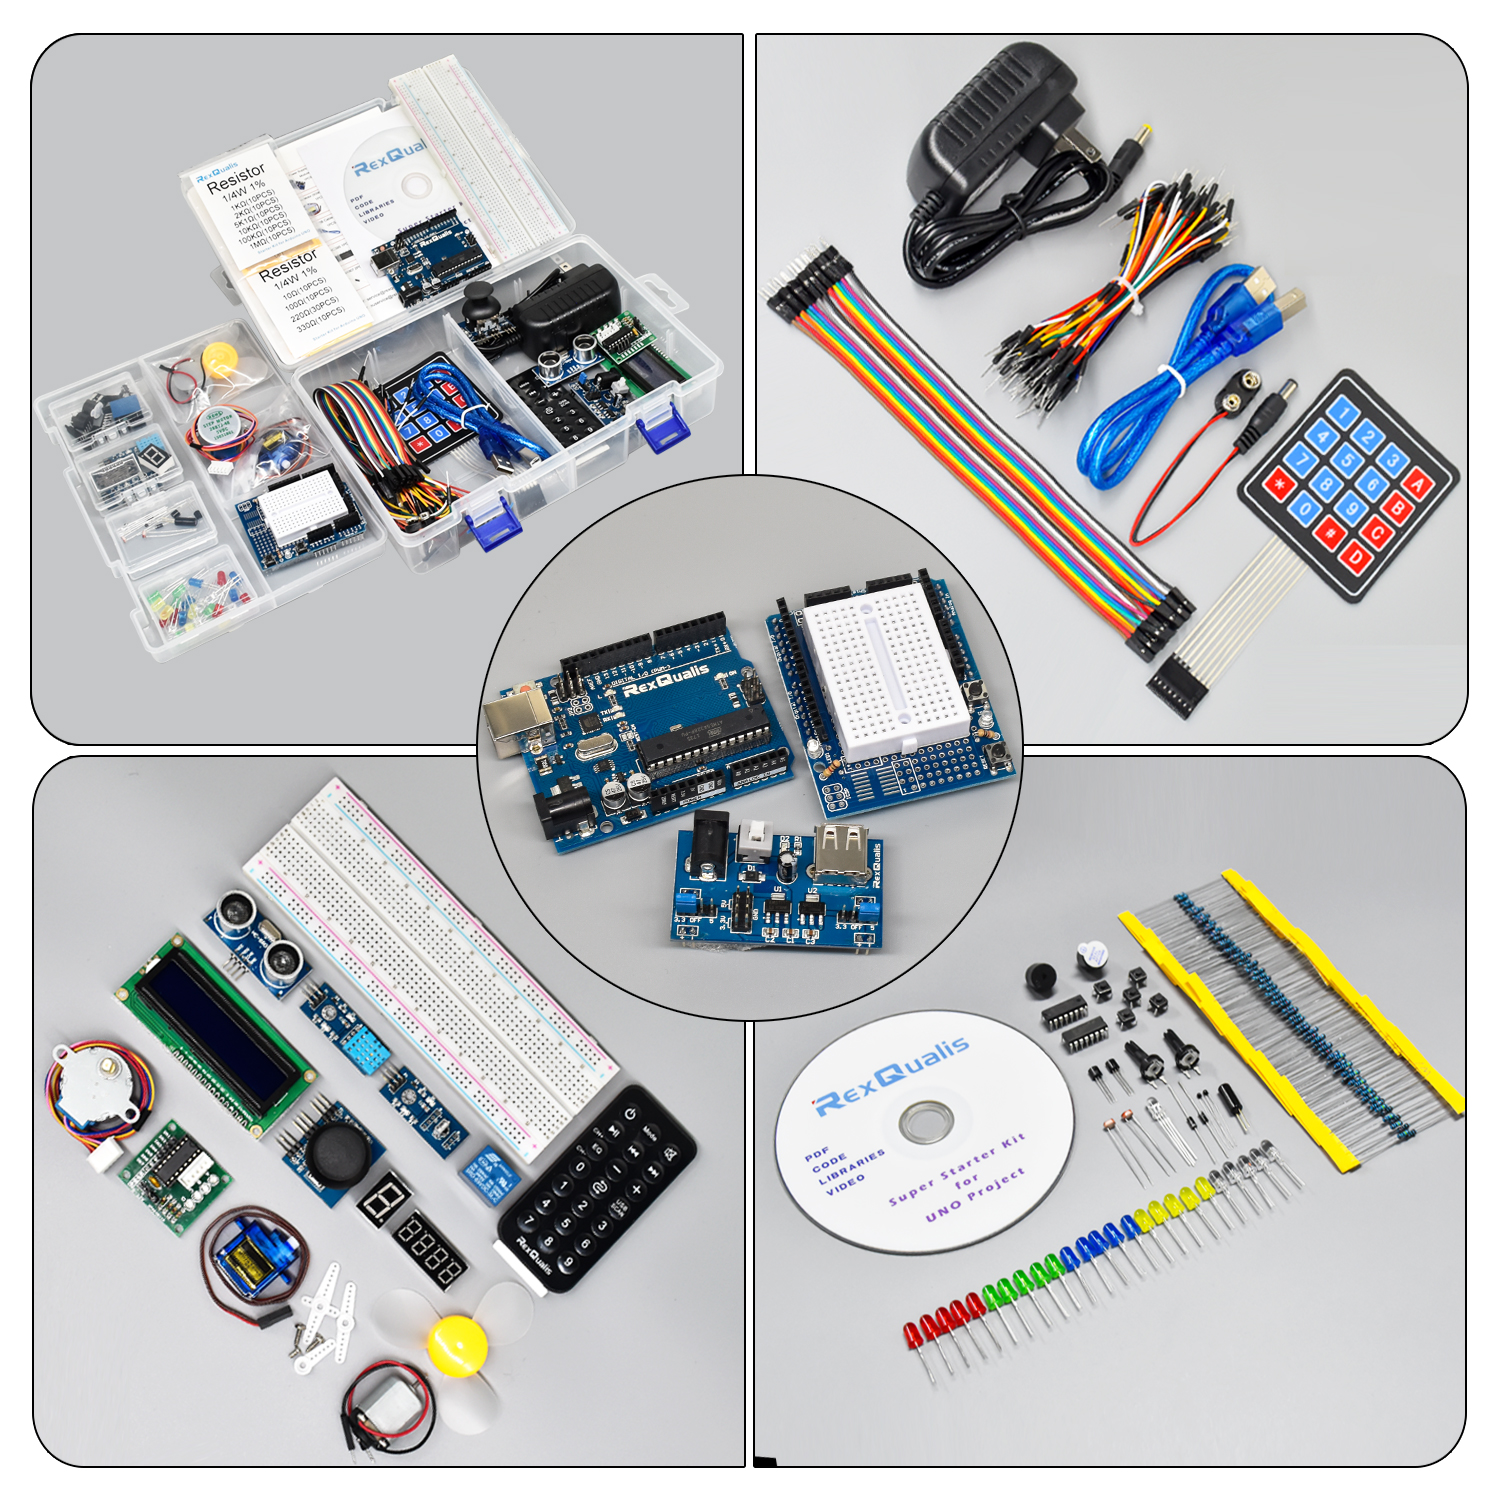 REXQualis Super Starter Kit based on Arduino UNO R3 with Tutorial and  Controller Board Compatible with Arduino IDE - Rexqualis  Industries,Ingenious & fun DIY electronics and kits